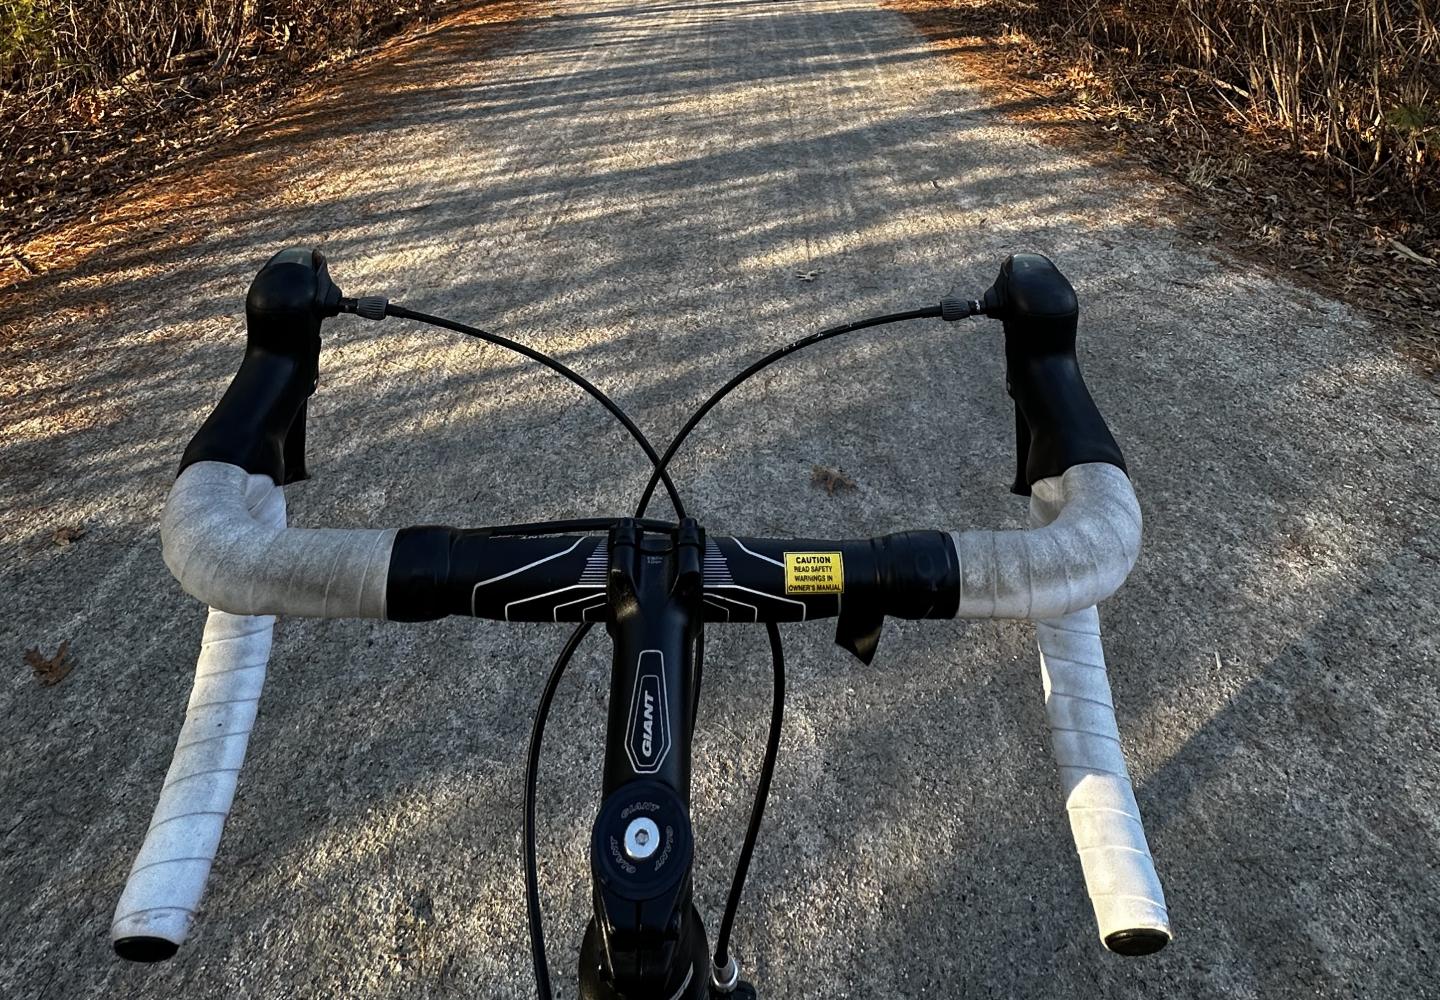 The Adirondack Rail Trail will have a stone dust surface that all bikes can ride.